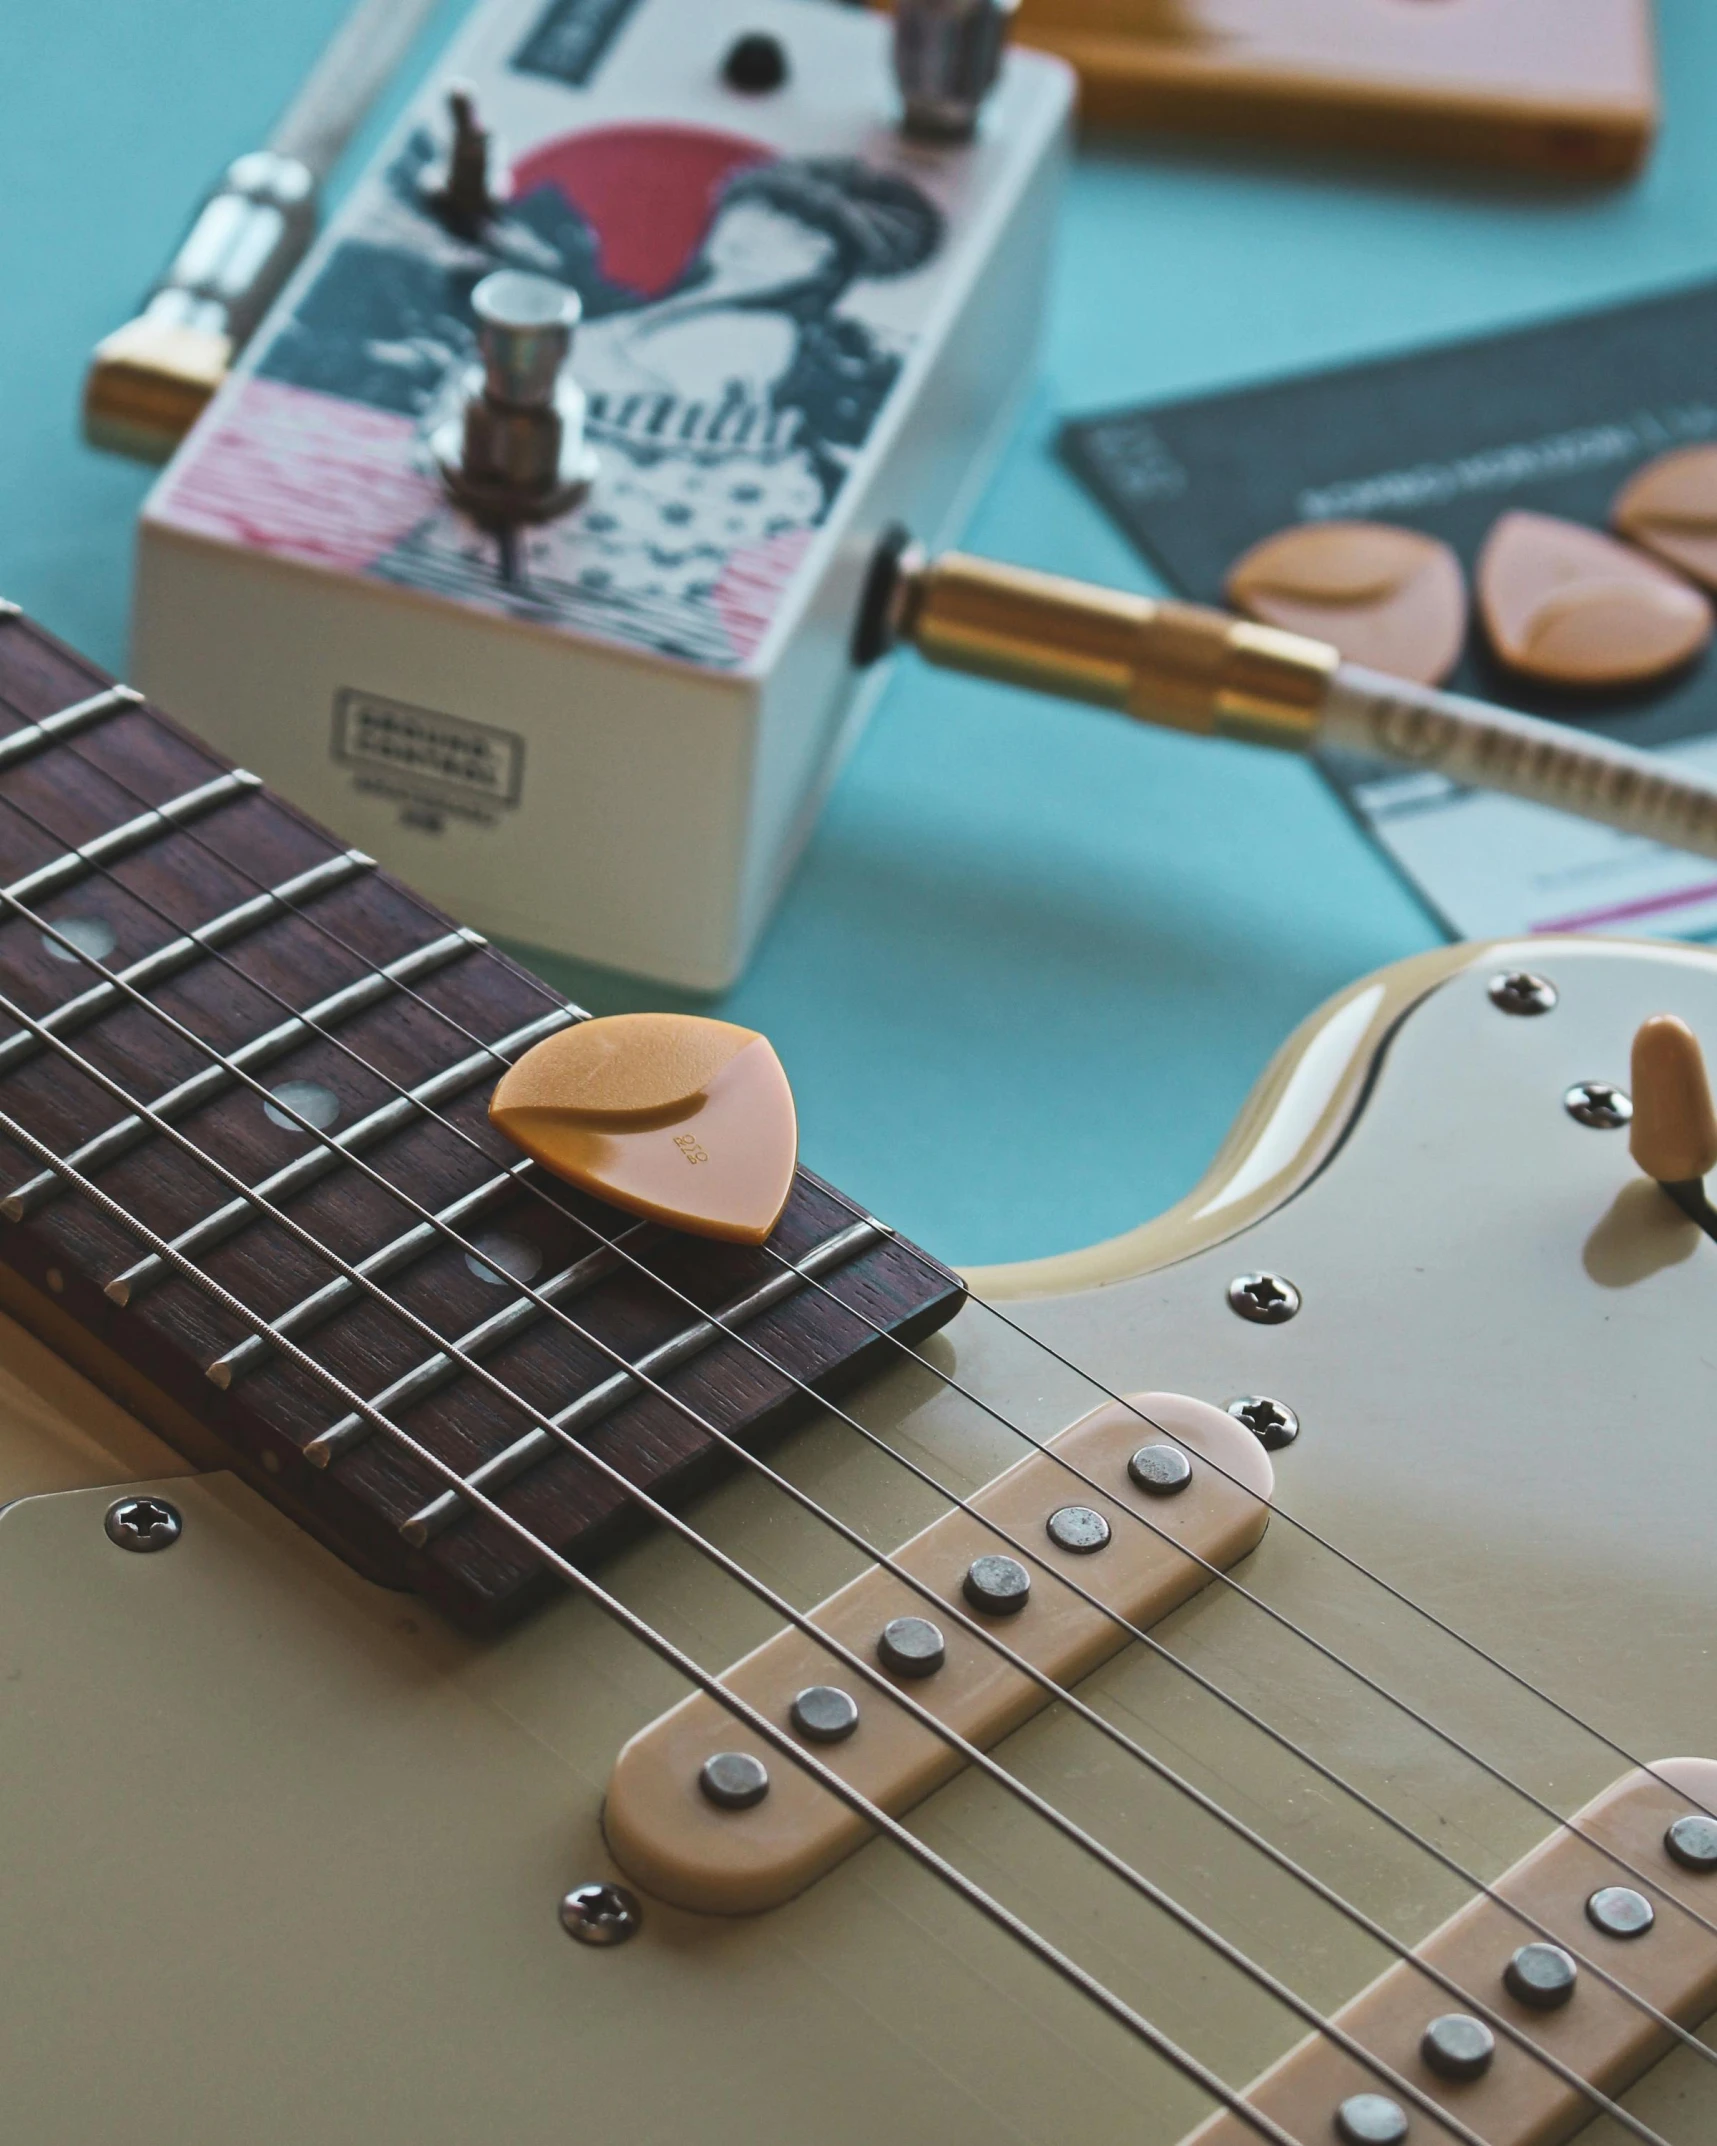 a close up of a guitar on a table, heart shaped face, adafruit, buttons, retro aesthetic